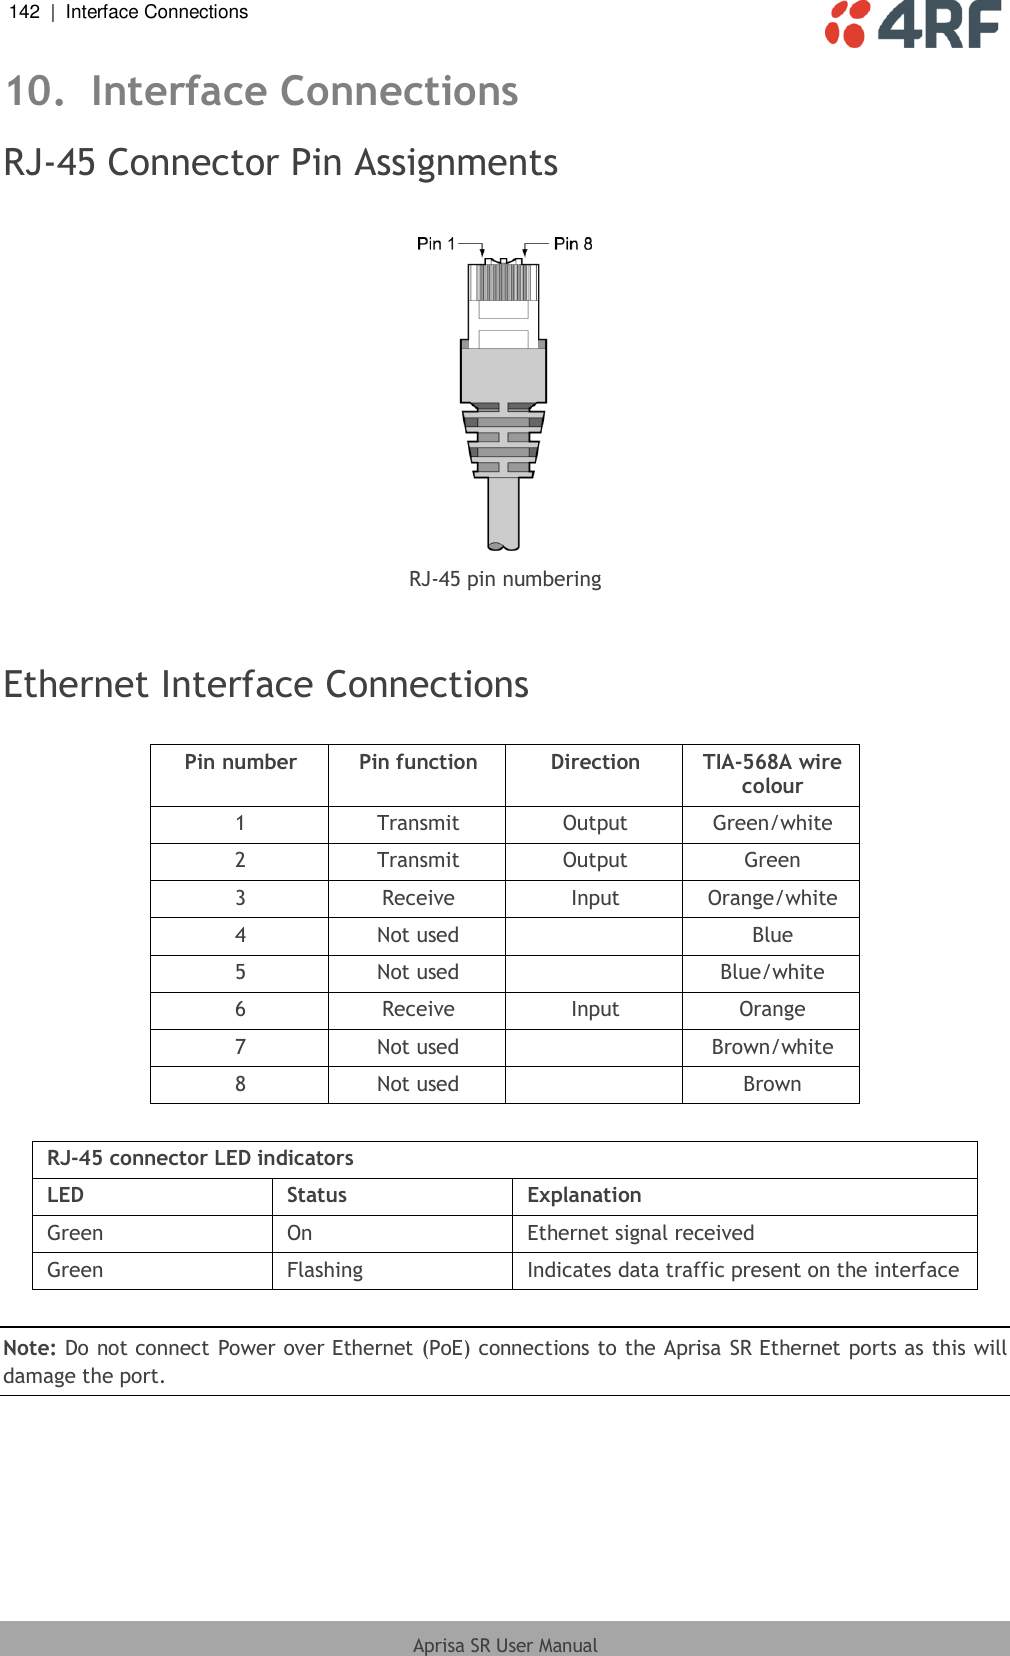 142  |  Interface Connections   Aprisa SR User Manual  10. Interface Connections RJ-45 Connector Pin Assignments   RJ-45 pin numbering   Ethernet Interface Connections  Pin number Pin function Direction TIA-568A wire colour 1 Transmit Output Green/white 2 Transmit Output Green 3 Receive Input Orange/white 4 Not used  Blue 5 Not used  Blue/white 6 Receive Input Orange 7 Not used  Brown/white 8 Not used  Brown  RJ-45 connector LED indicators LED Status Explanation Green On Ethernet signal received Green Flashing Indicates data traffic present on the interface  Note: Do not connect Power over Ethernet (PoE) connections to the Aprisa SR Ethernet ports as this will damage the port. 